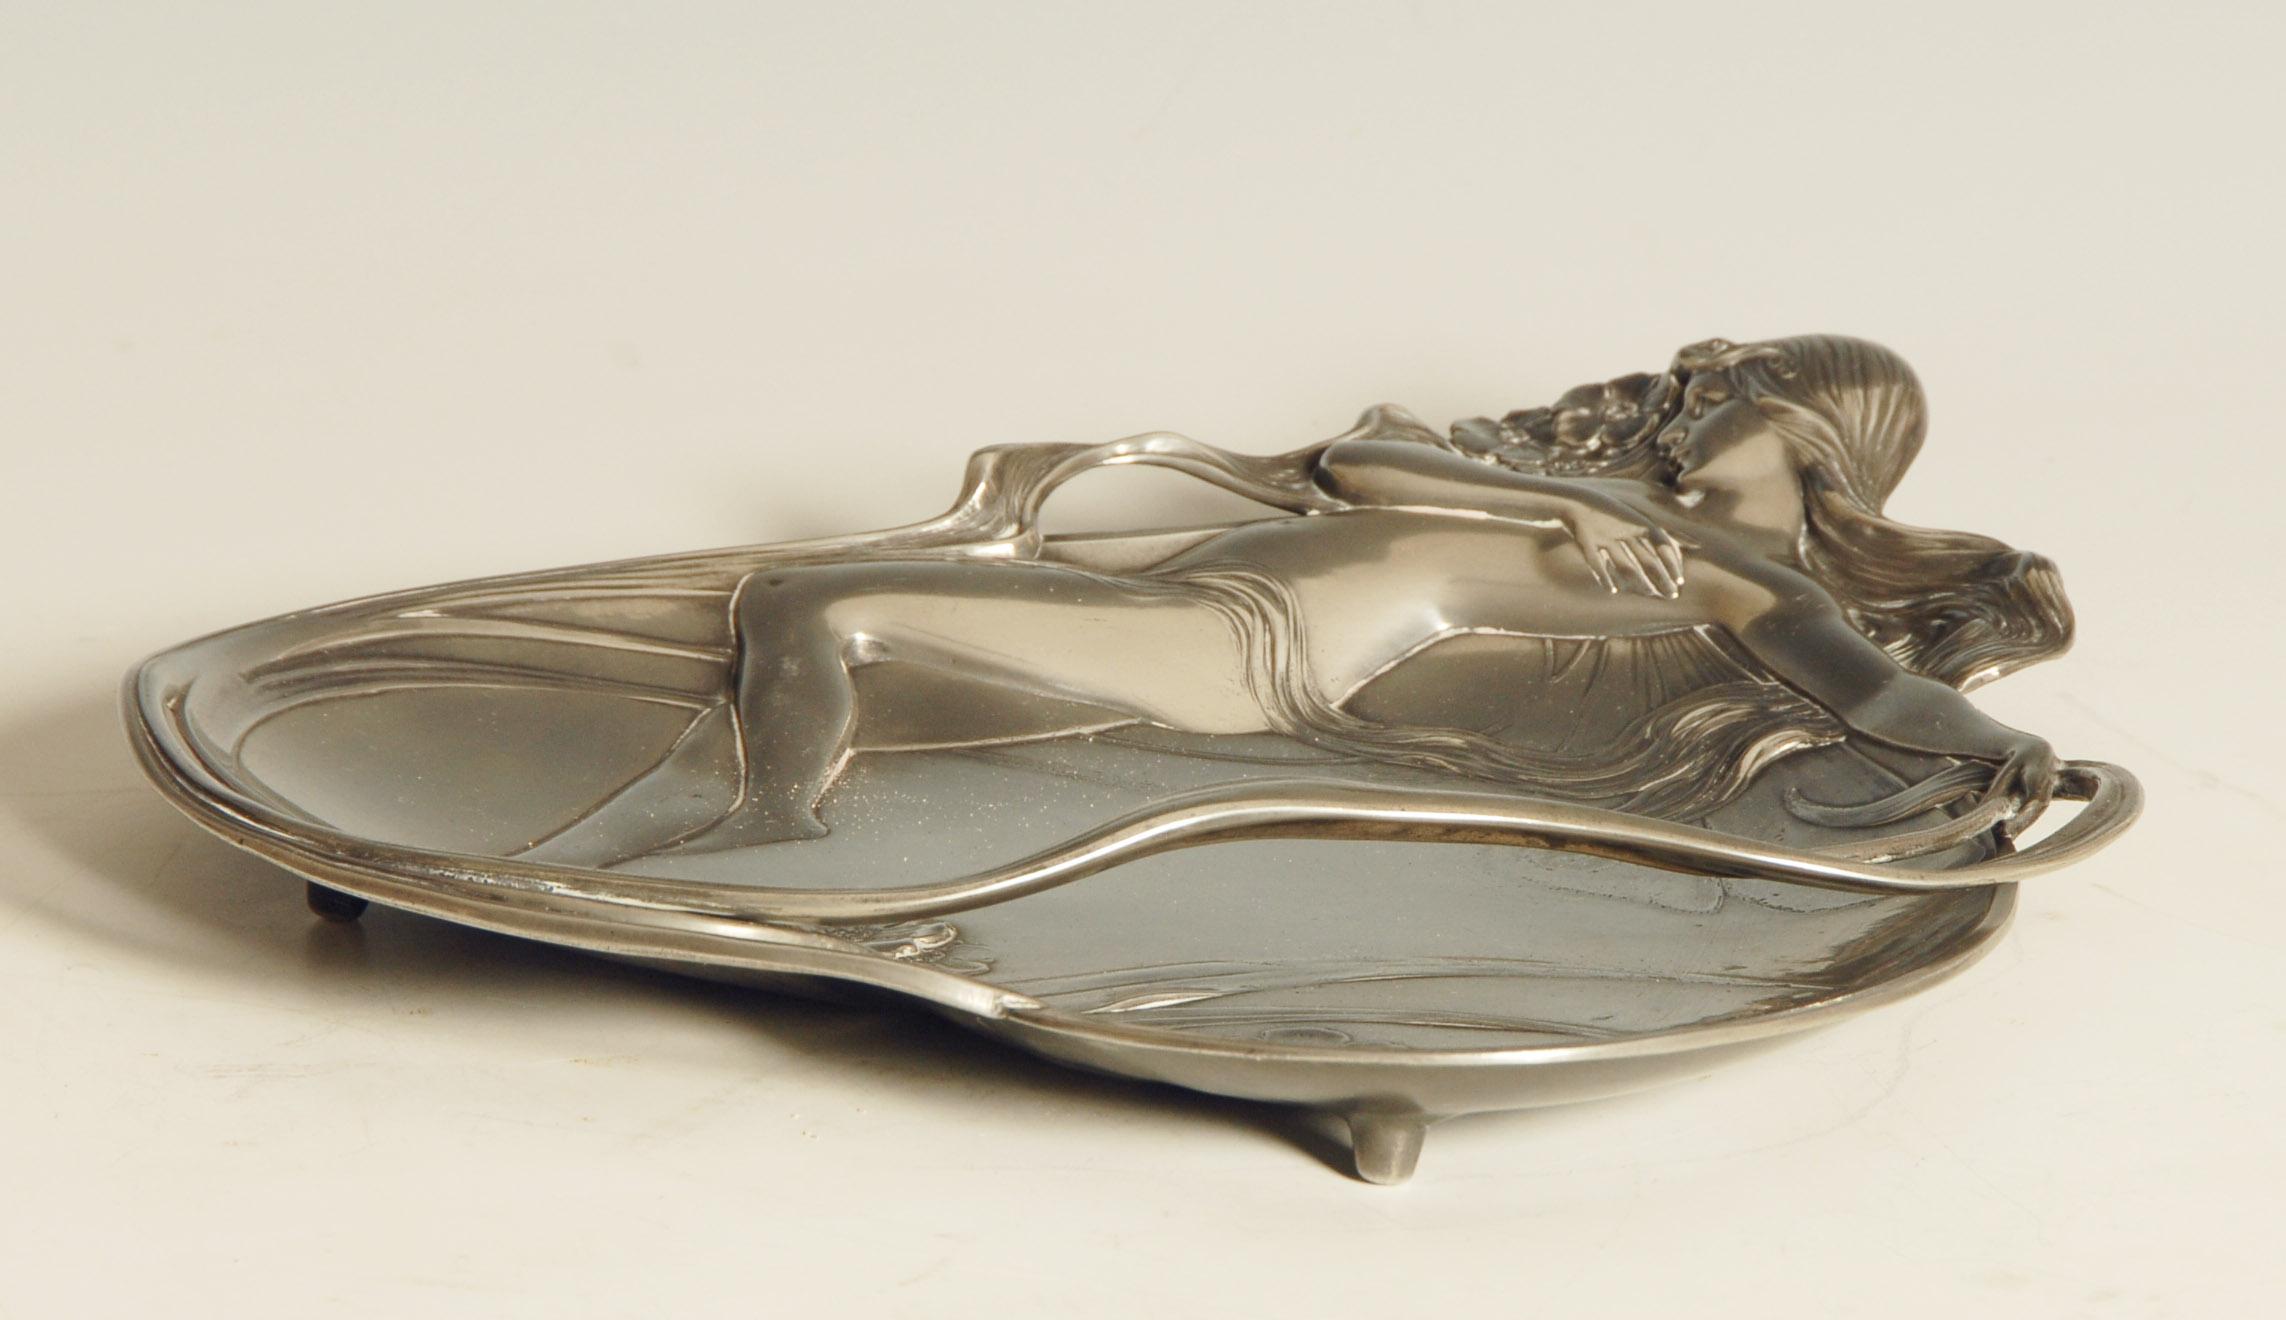 WMF Art Nouveau dish depicting a nude lady on a heart shaped leaf, circa 1900.

Plated pewter, manufacturers stamp, model number 232.

Price includes free shipping to anywhere in the world.